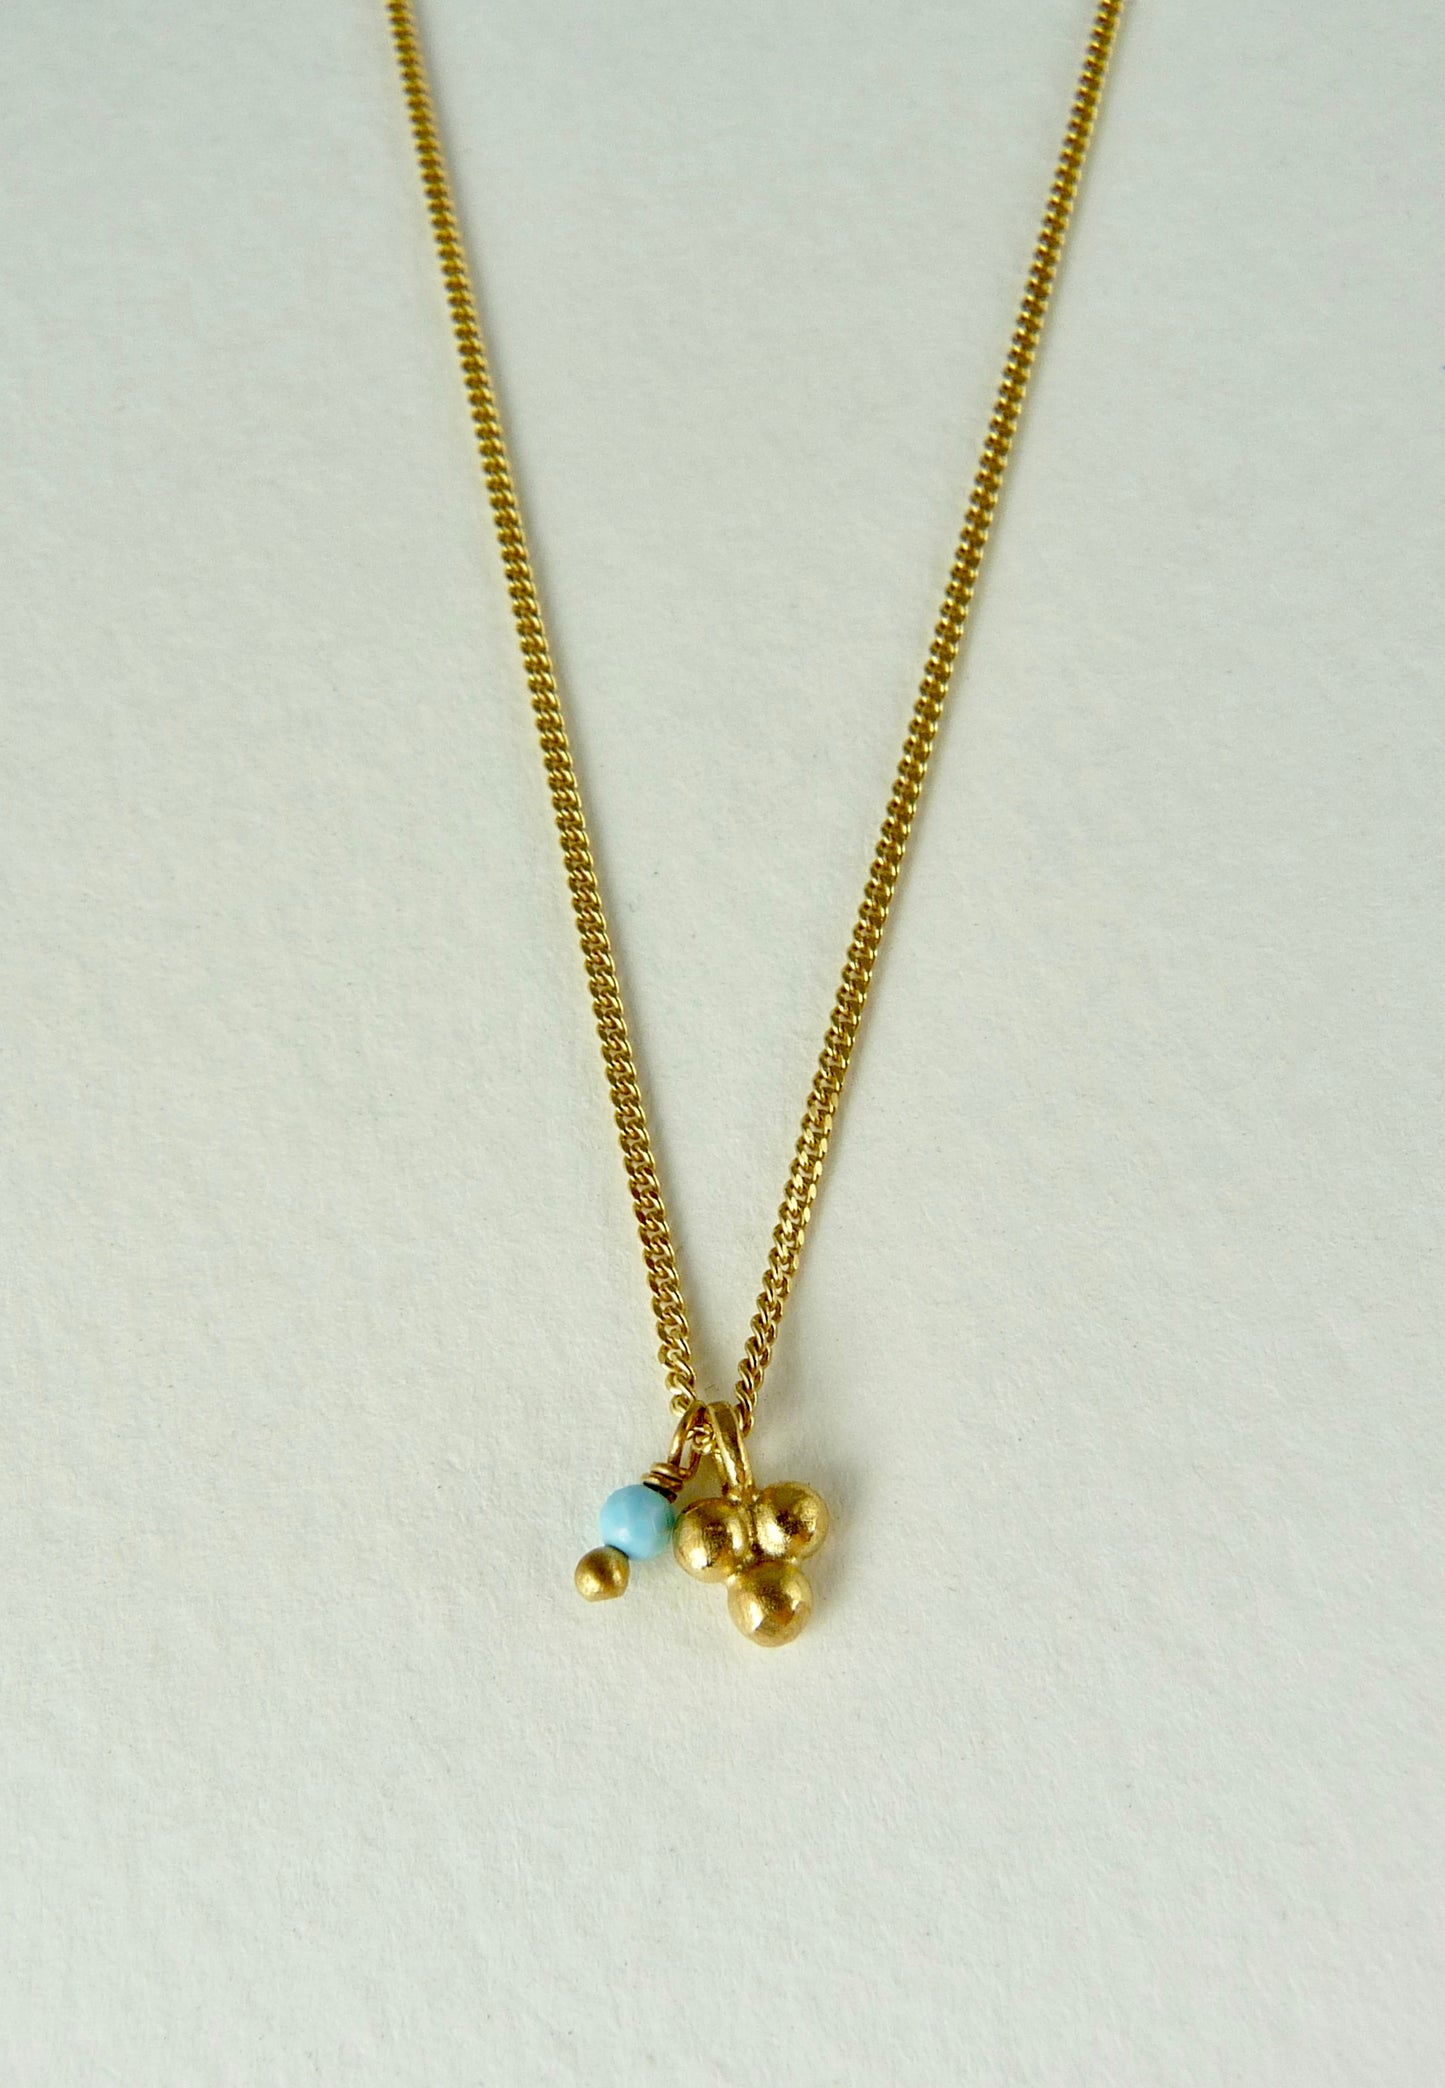 Delicate Triple Granulation Necklace with Turquoise